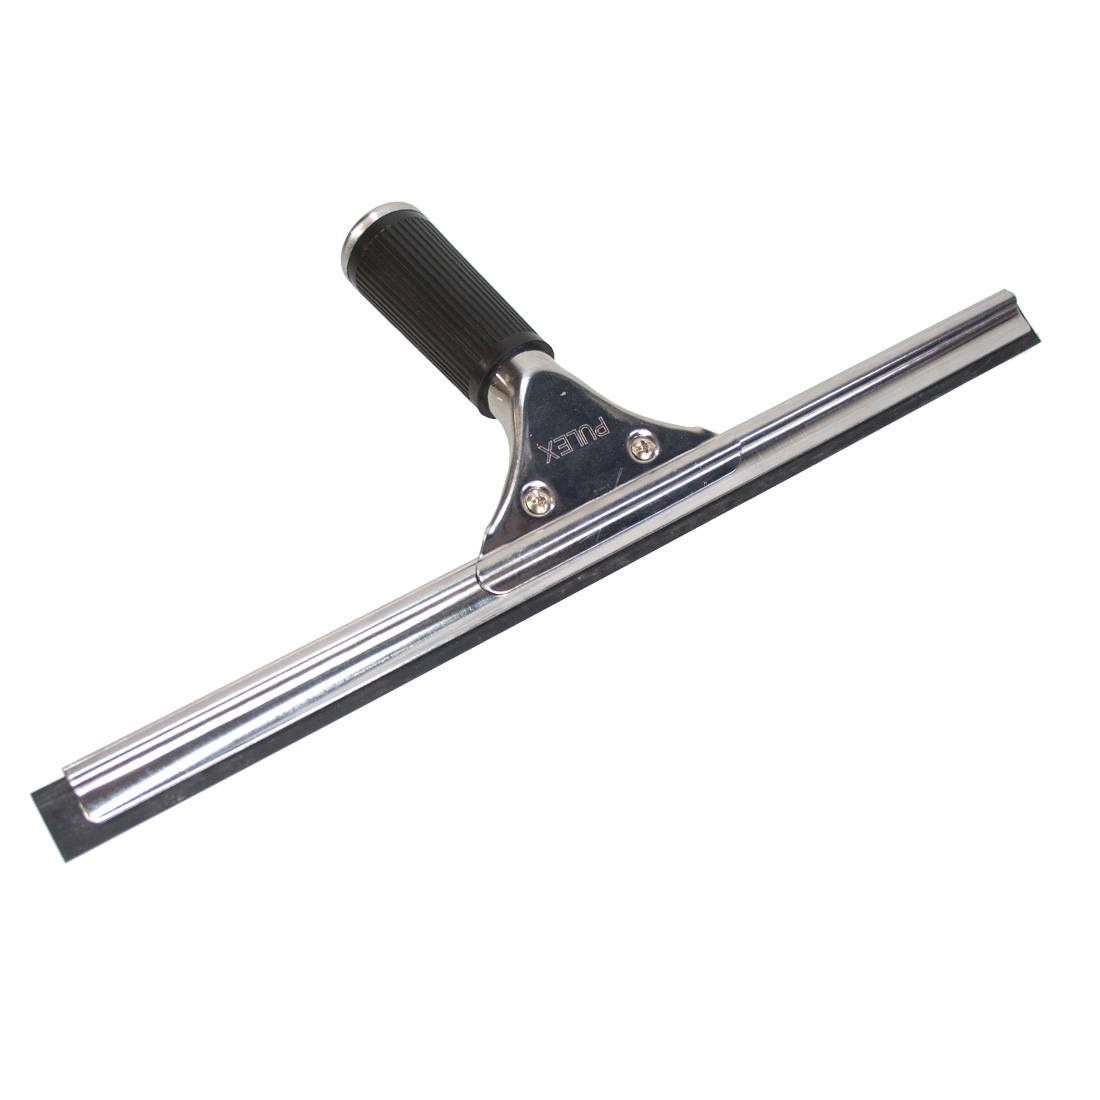 Pulex Complete Stainless Steel with Rubber Grip Squeegee Top View